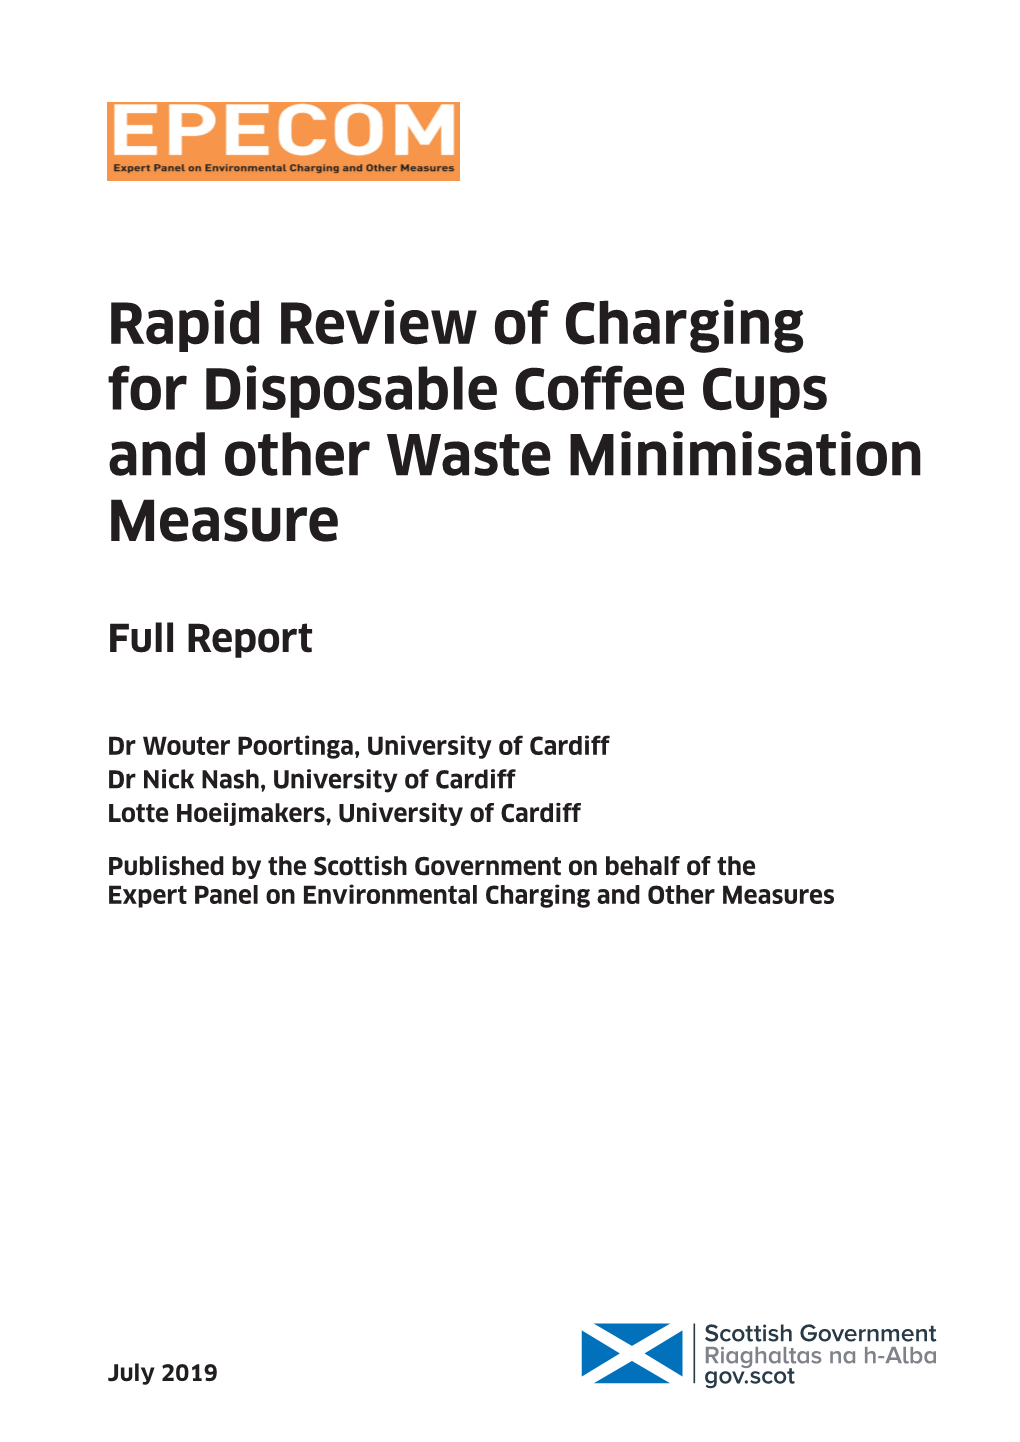 Rapid Review of Charging for Disposable Coffee Cups and Other Waste Minimisation Measure: Full Report